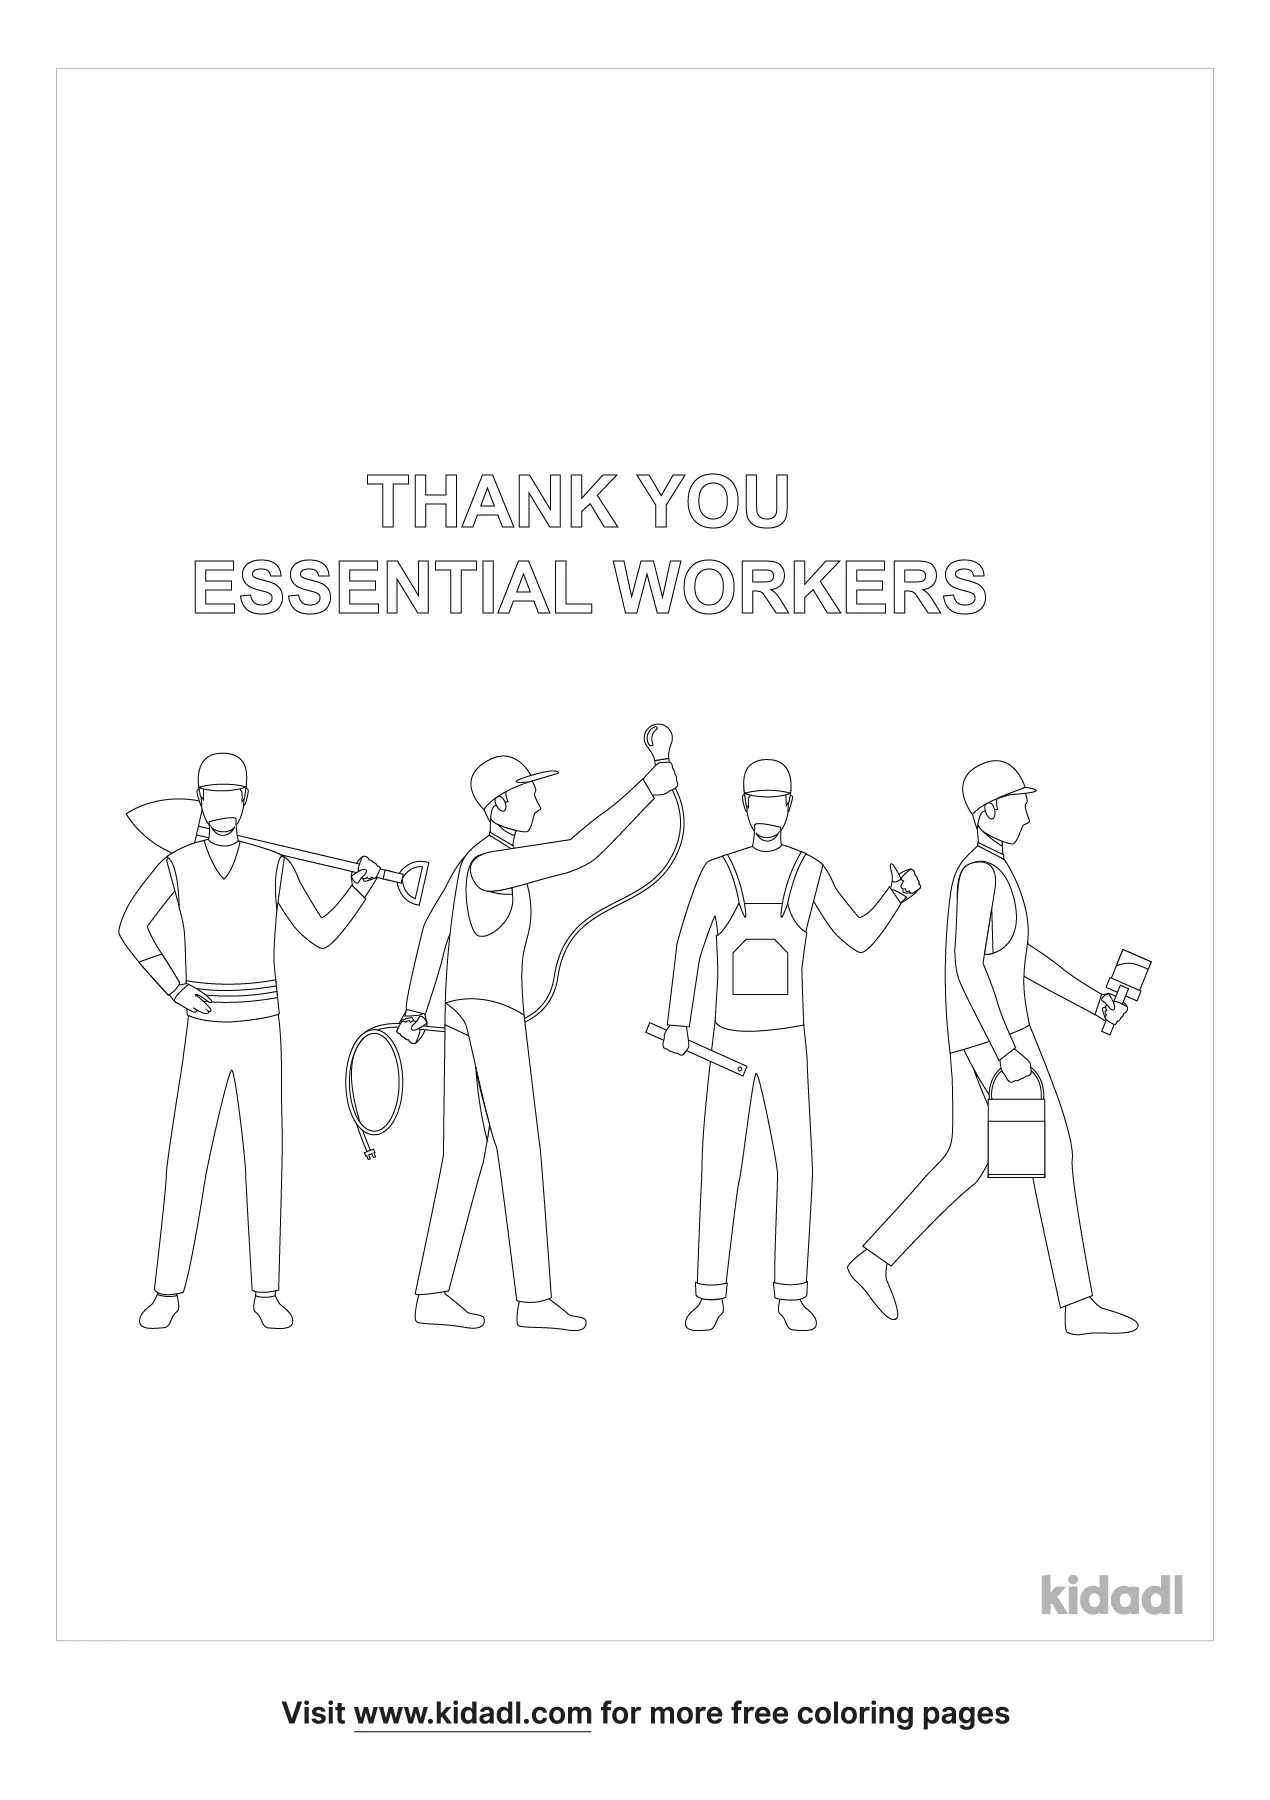 Thank You Essential Workers Coloring Page